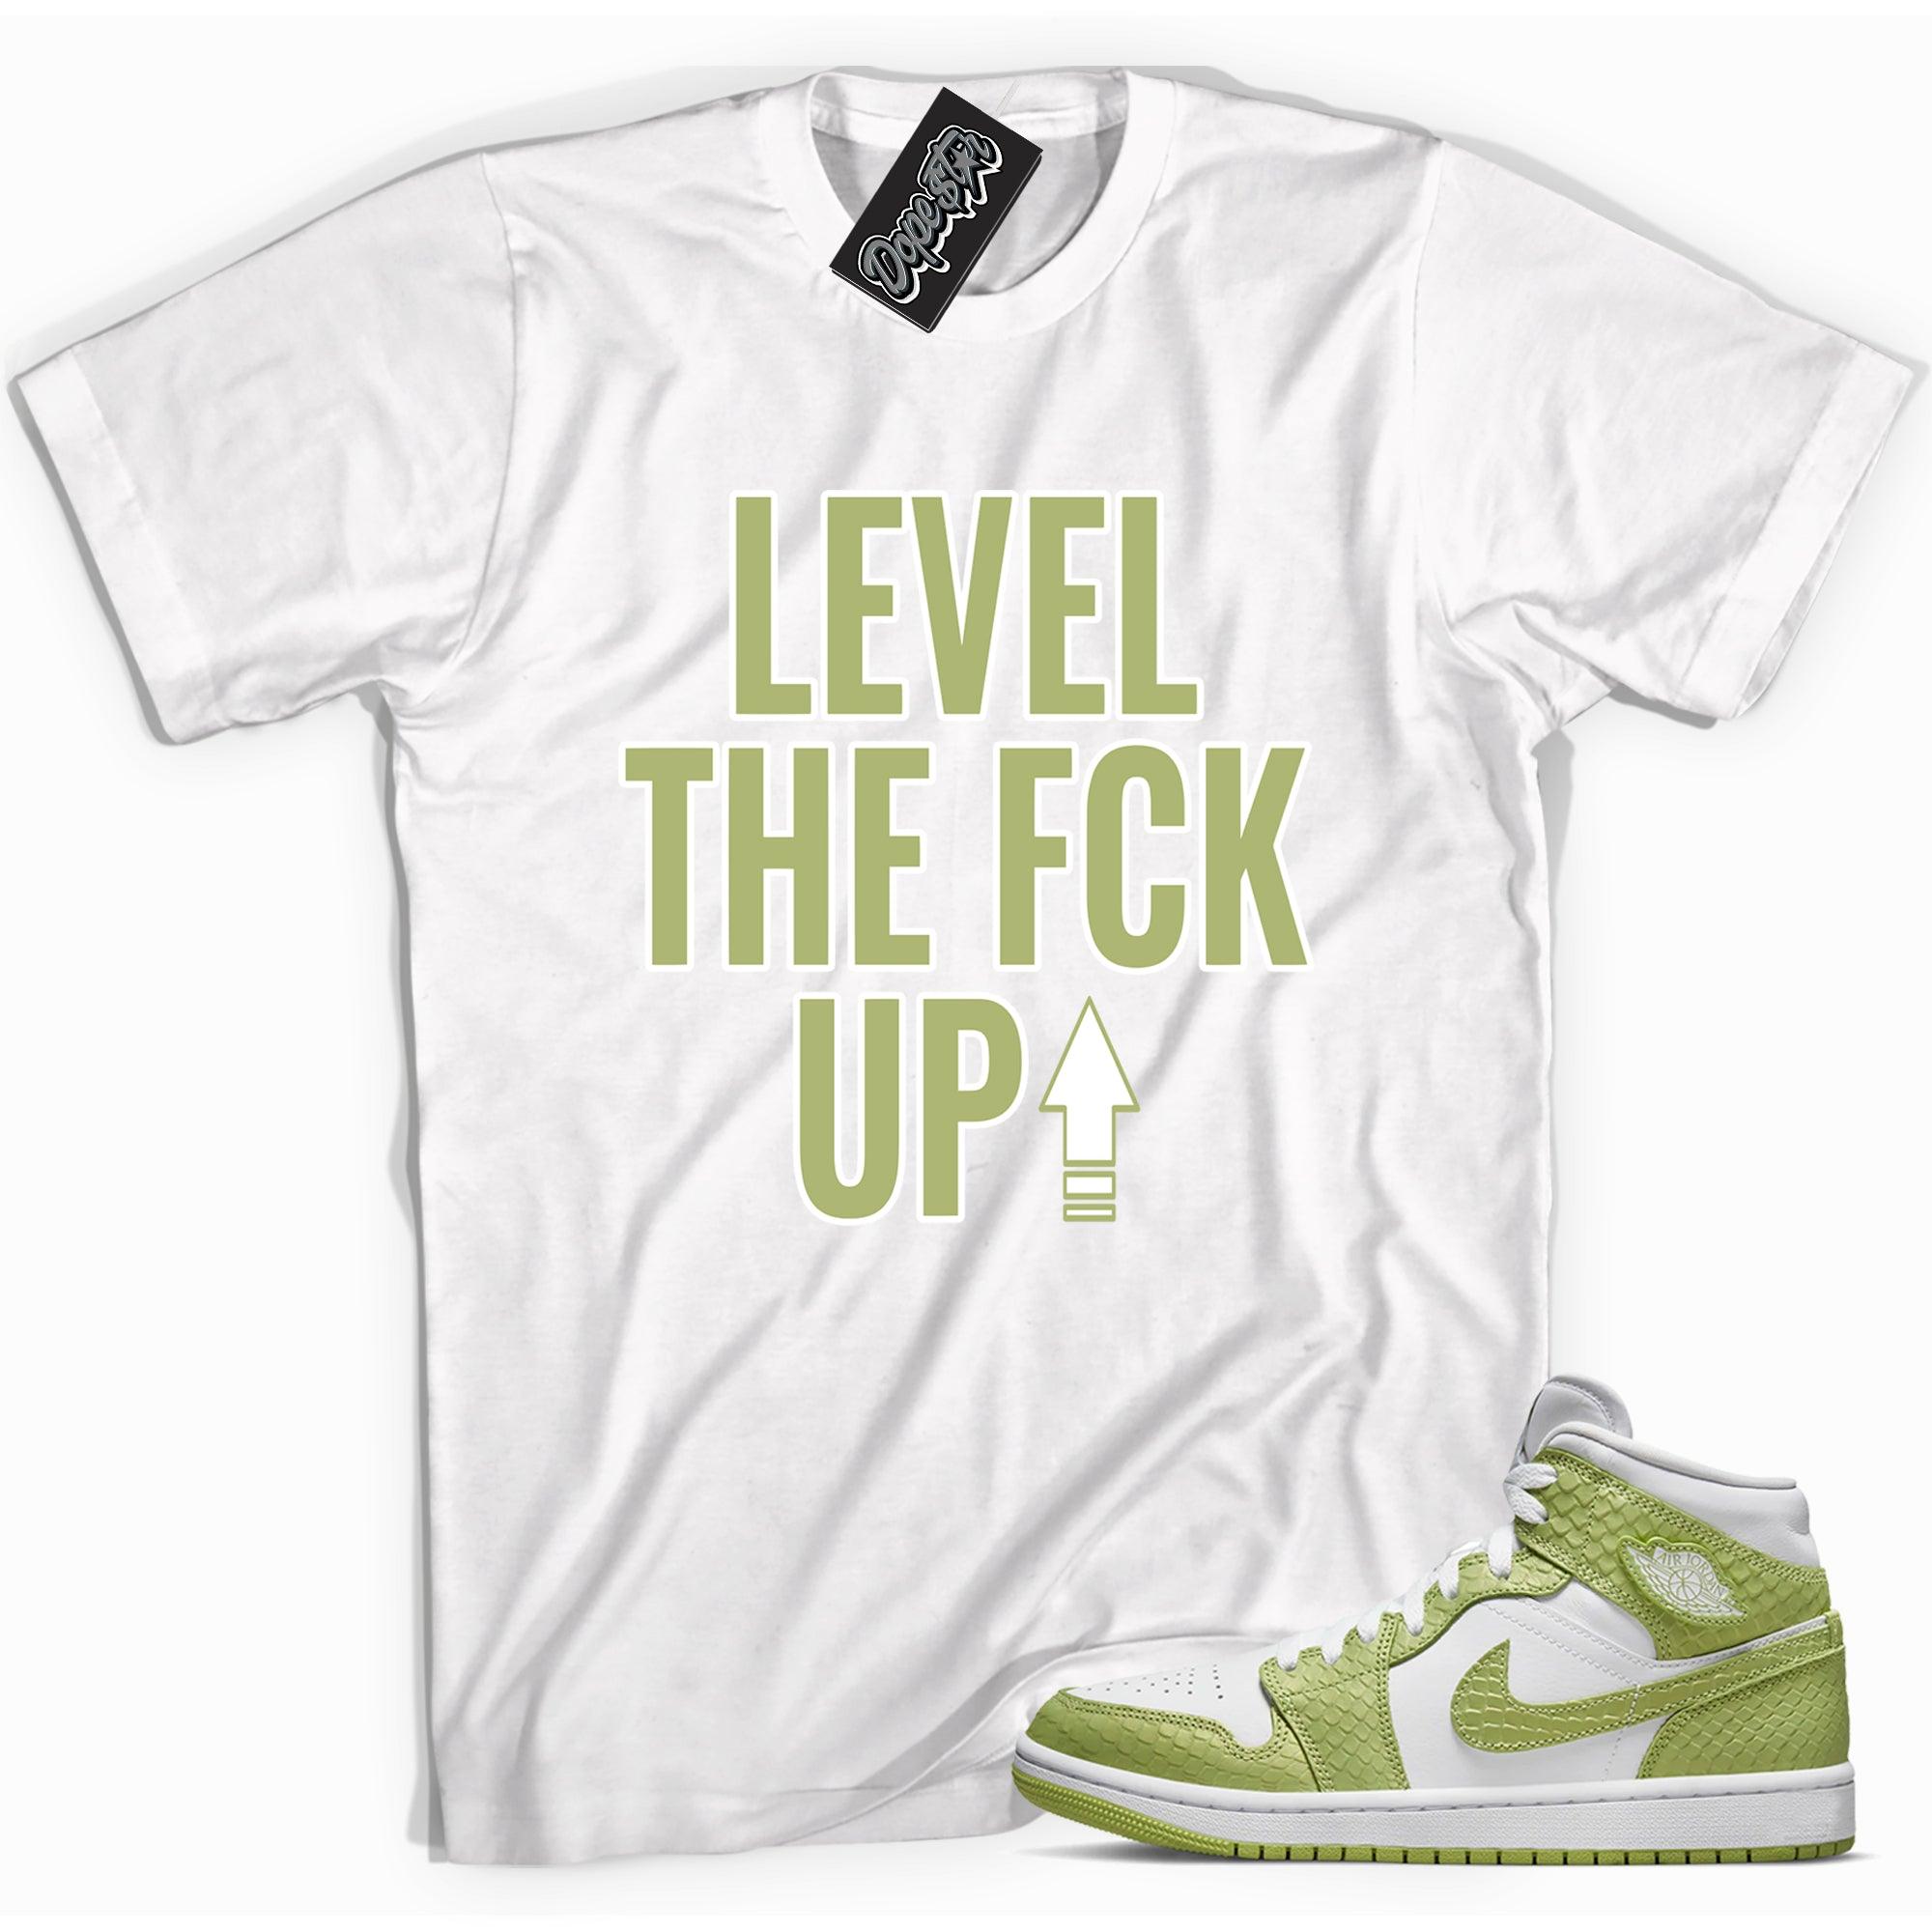 Cool white graphic tee with 'Level Up' print, that perfectly matches Air Jordan 1 Mid Green Python sneakers.